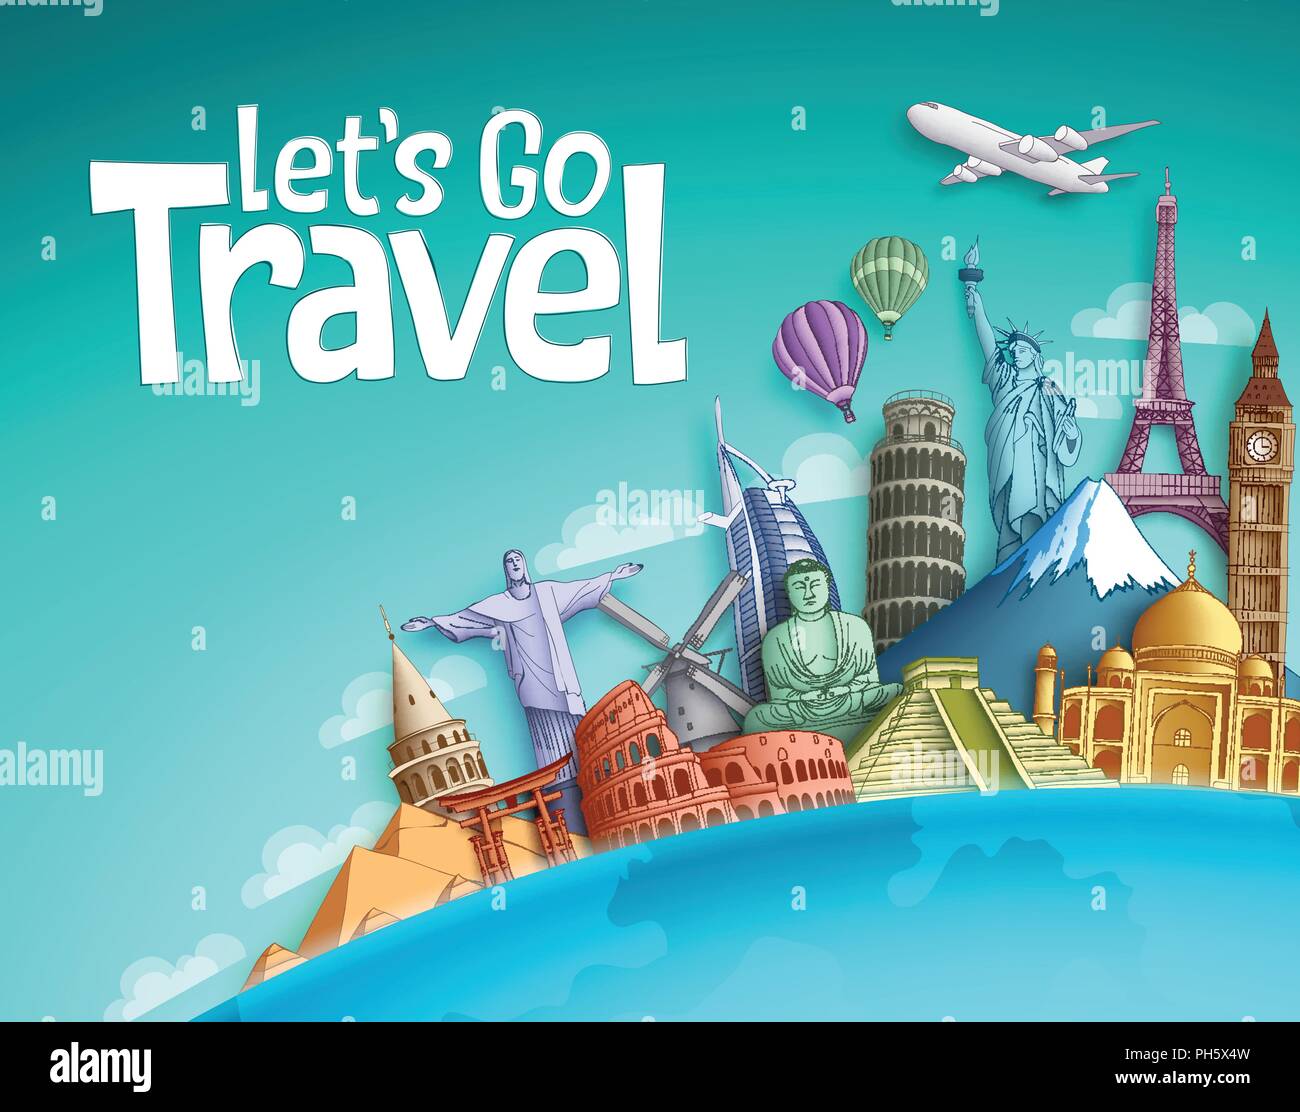 Let's go travel vector banner background design with world famous